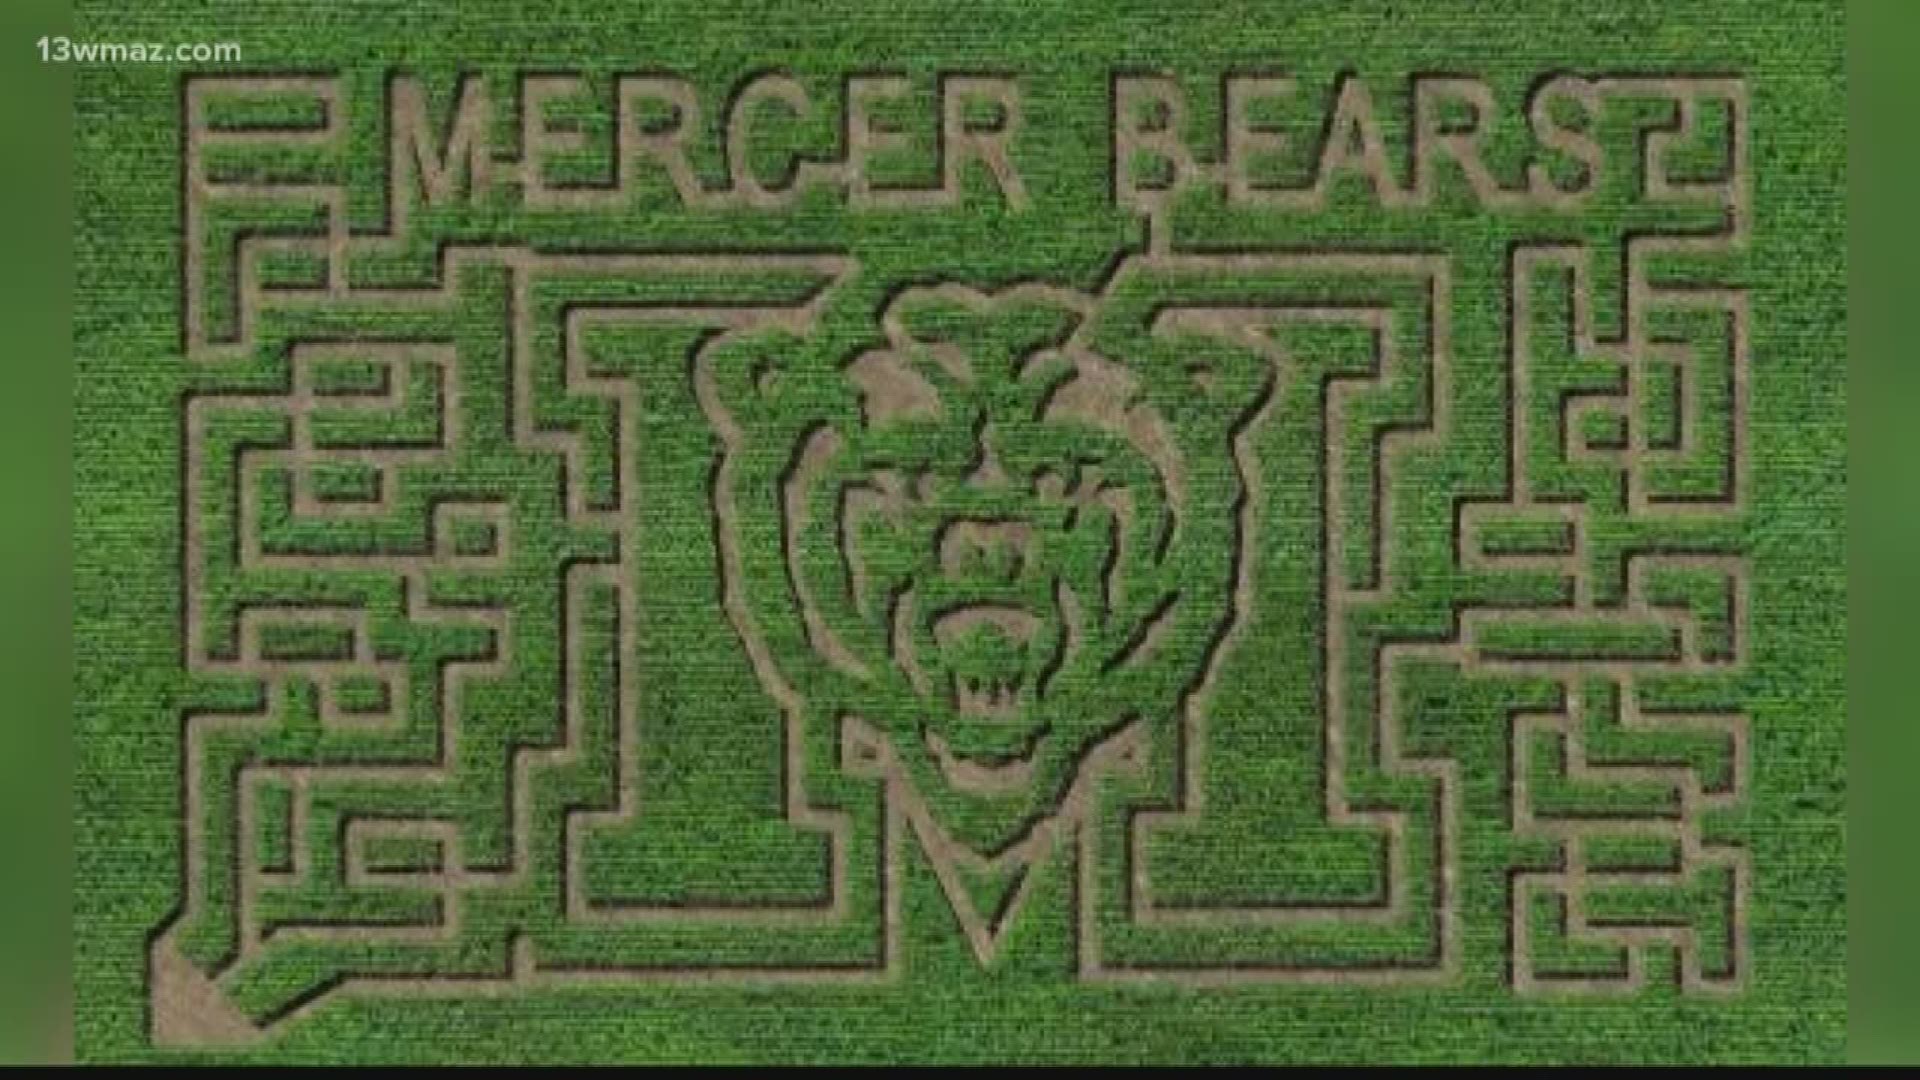 The Fort Valley orchard opened its corn maze on October 2 and plans to keep it up until Halloween.